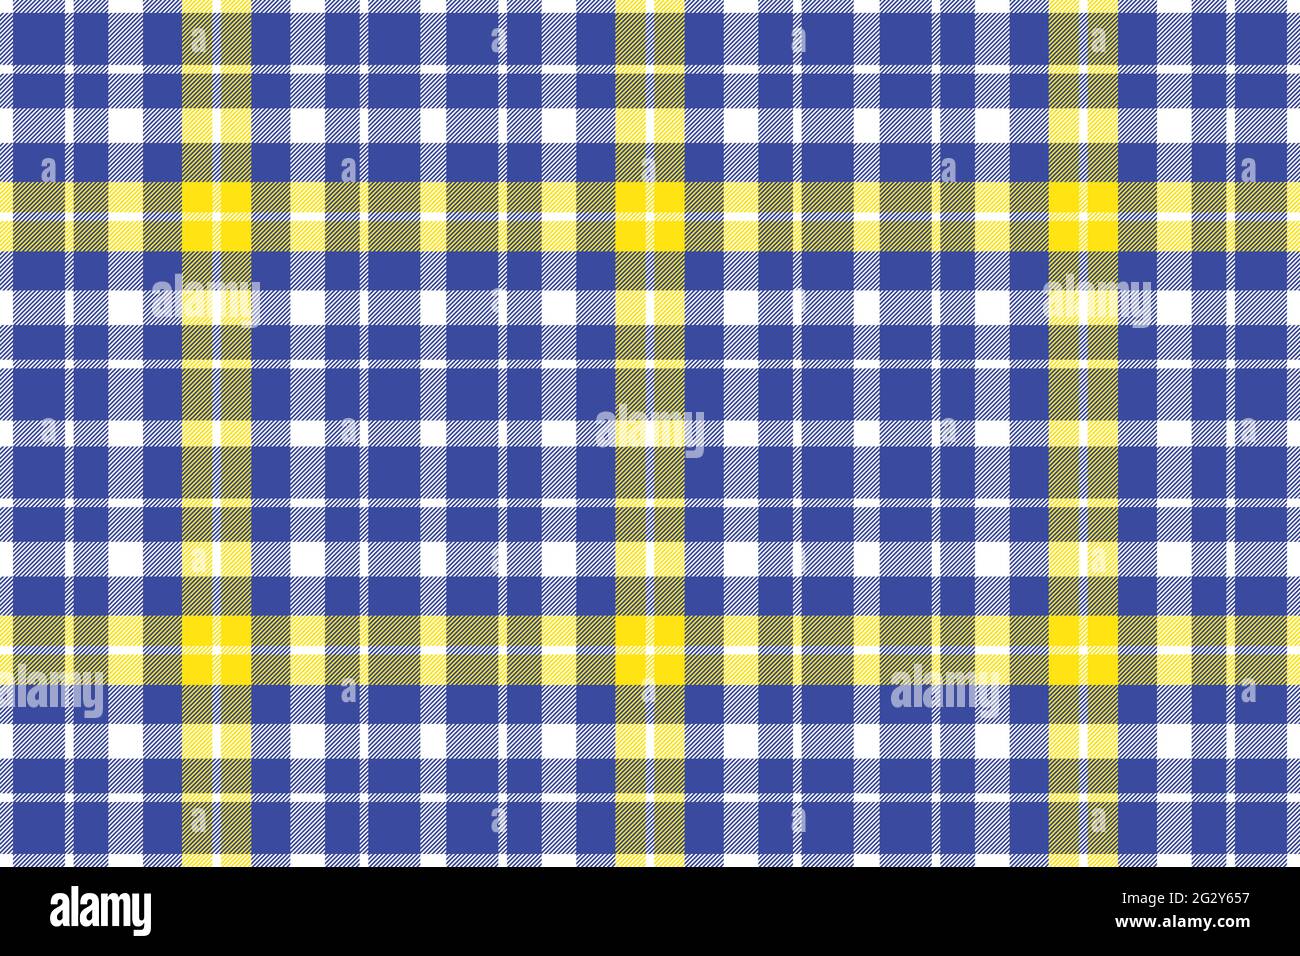 Plaid pattern seamless. Check fabric texture. Stripe square background ...